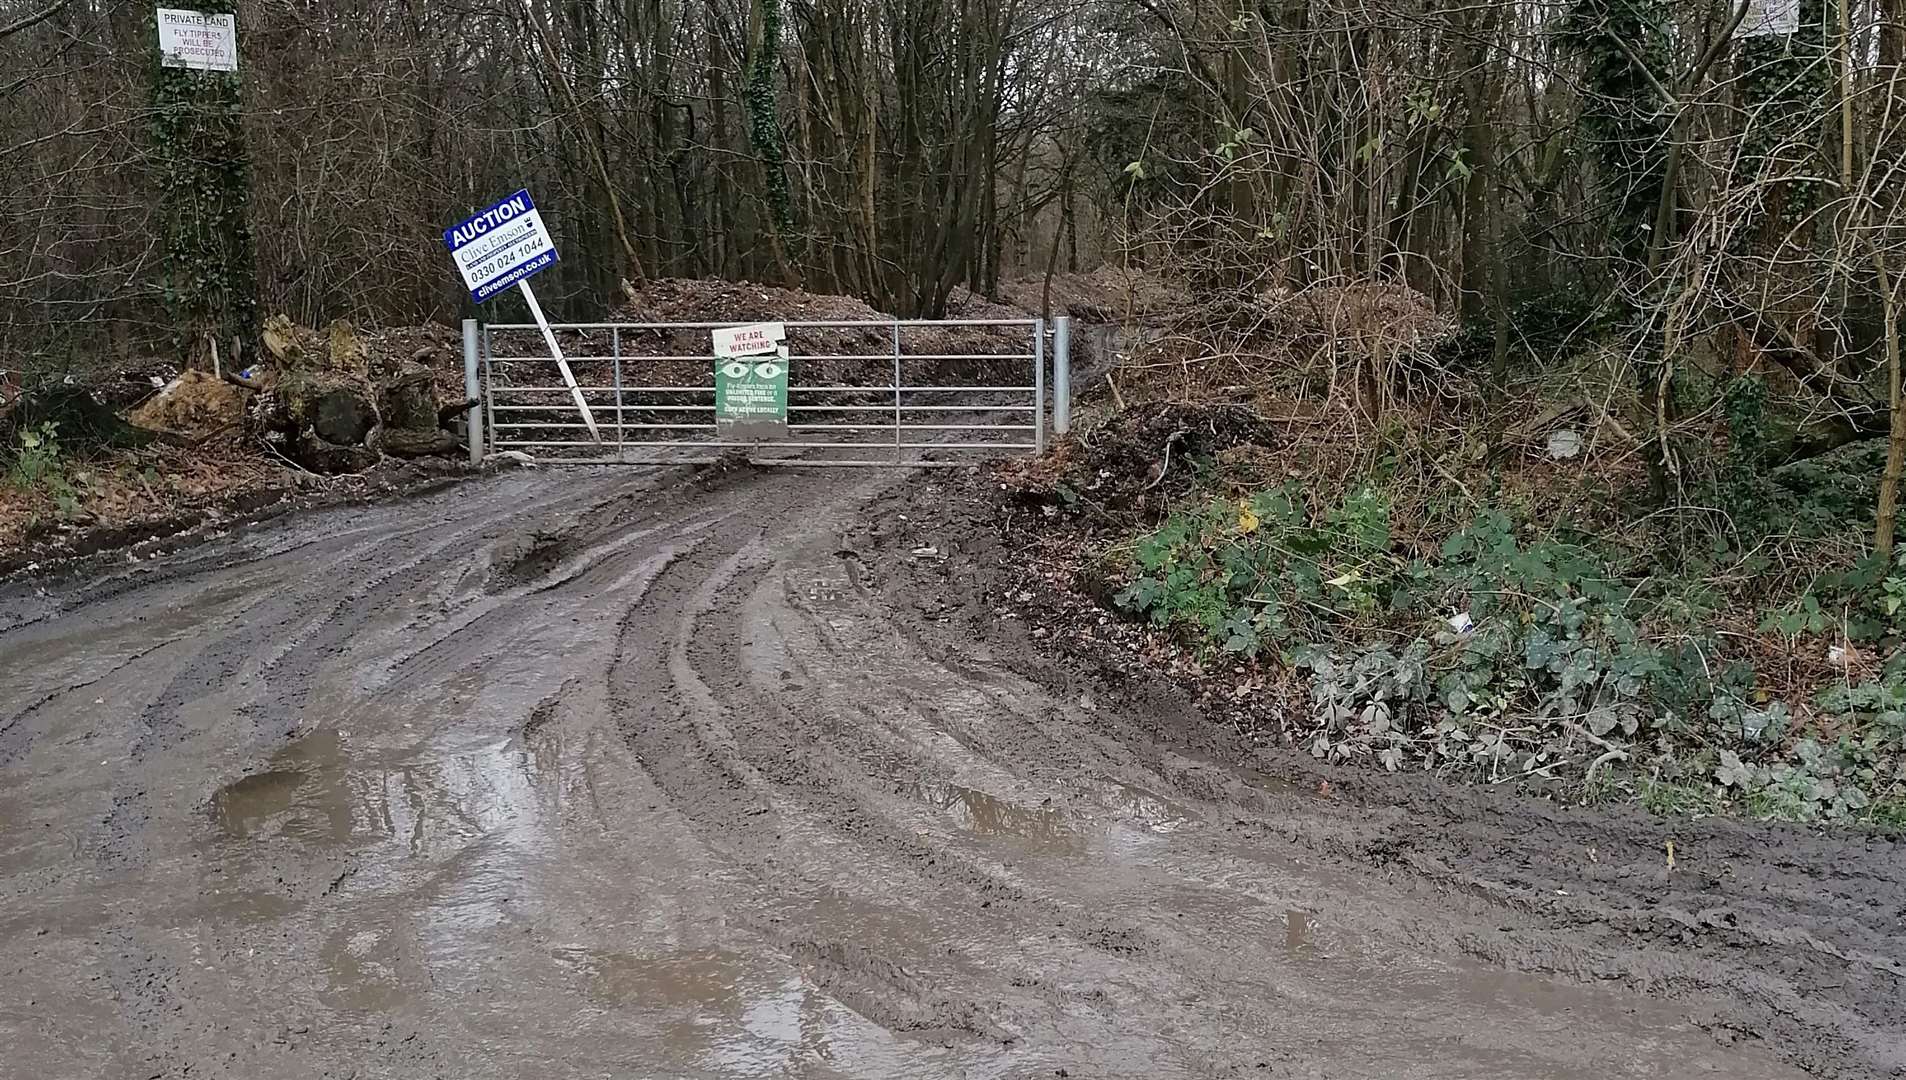 The Environment Agency has closed off the woodland